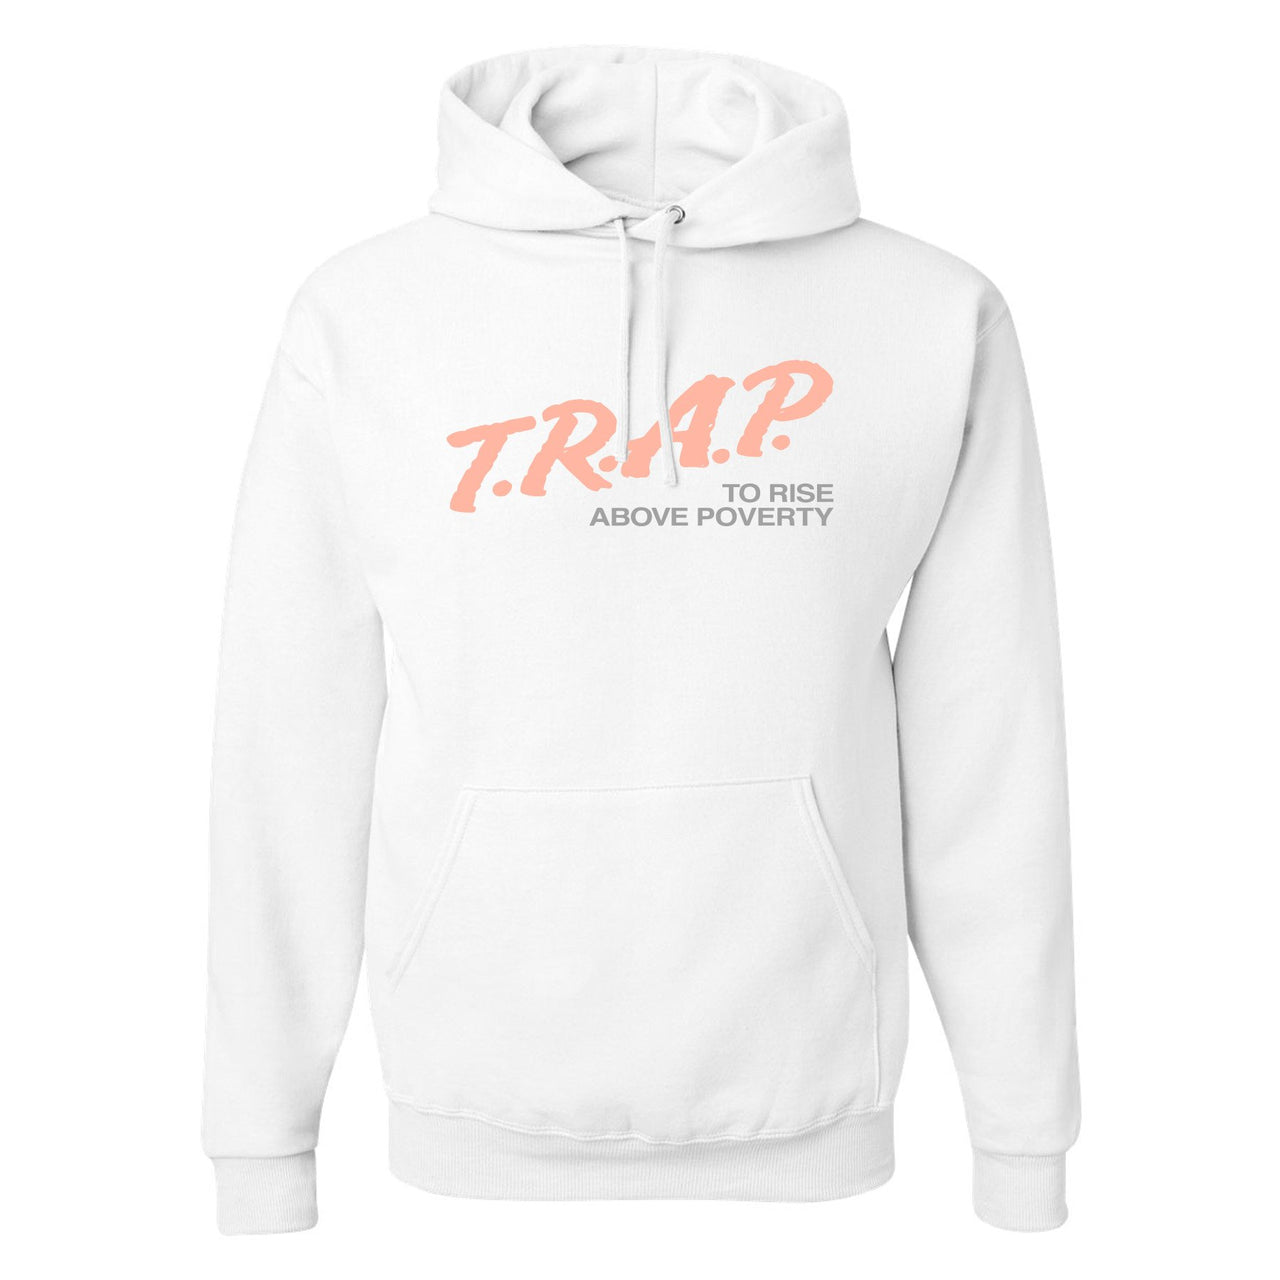 True Form v2 350s Hoodie | Trap To Rise Above Poverty, White